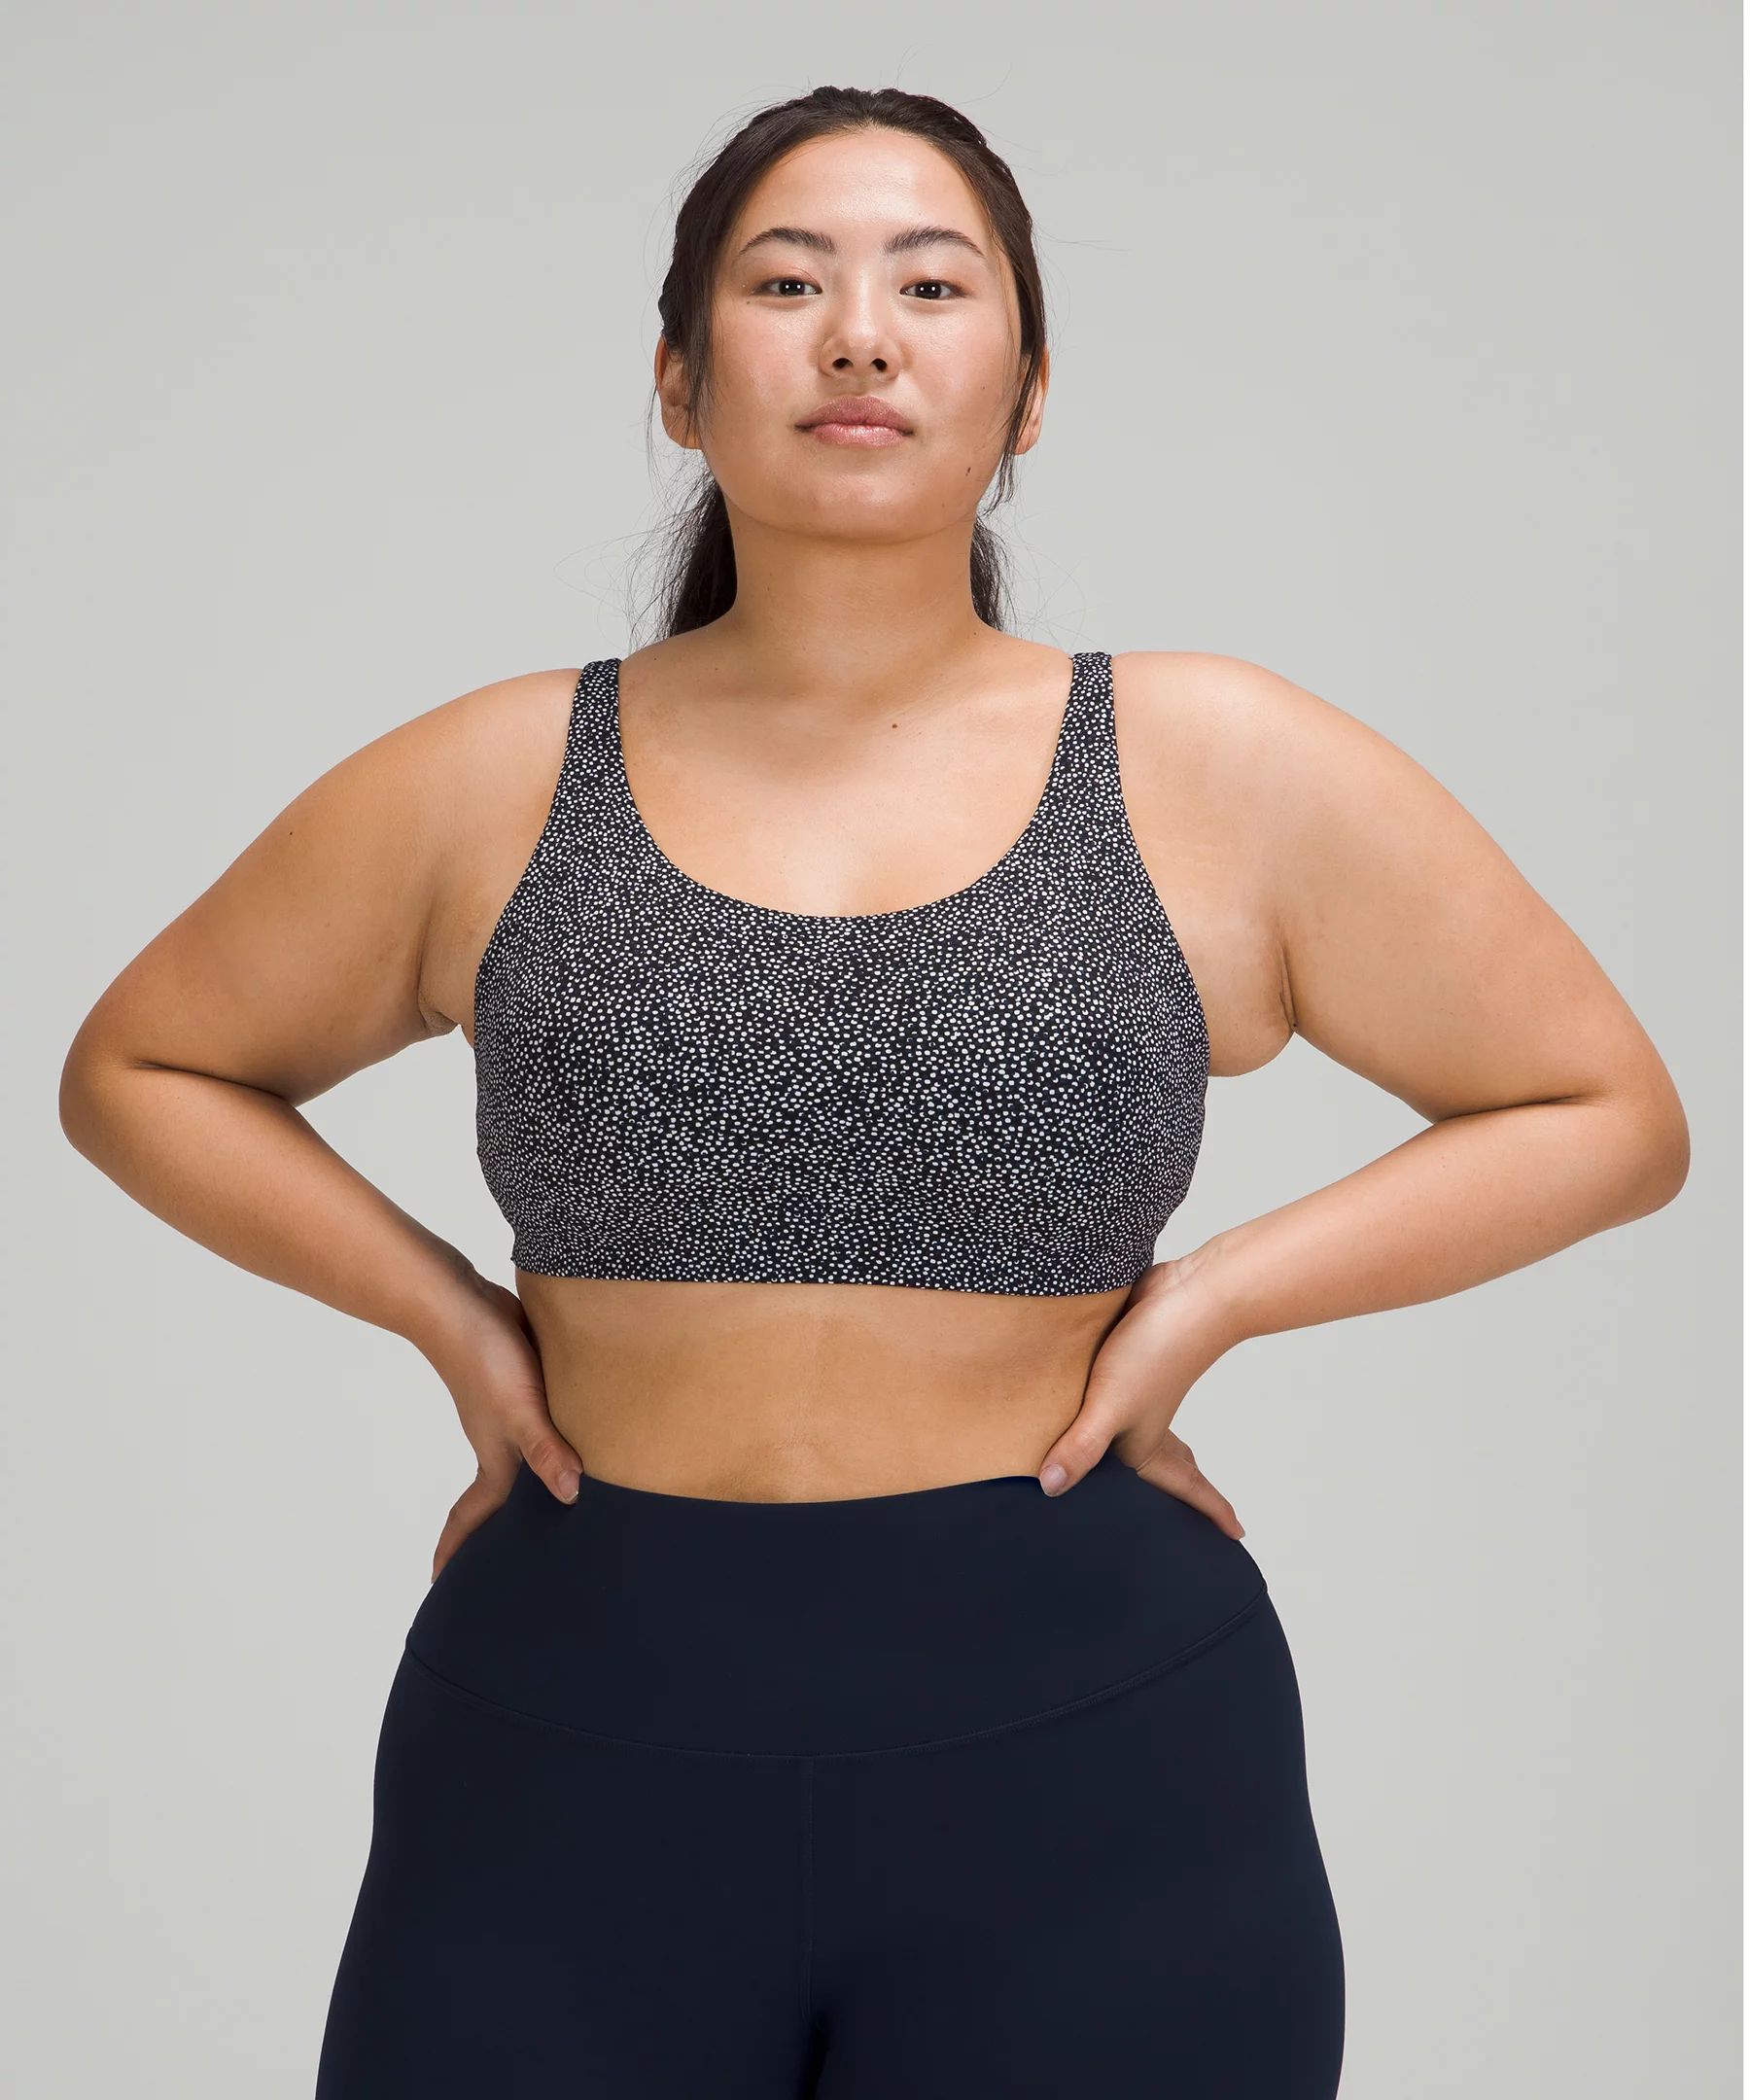 In Alignment Straight Strap Bra Light Support, C/D Cups | Lululemon (US)